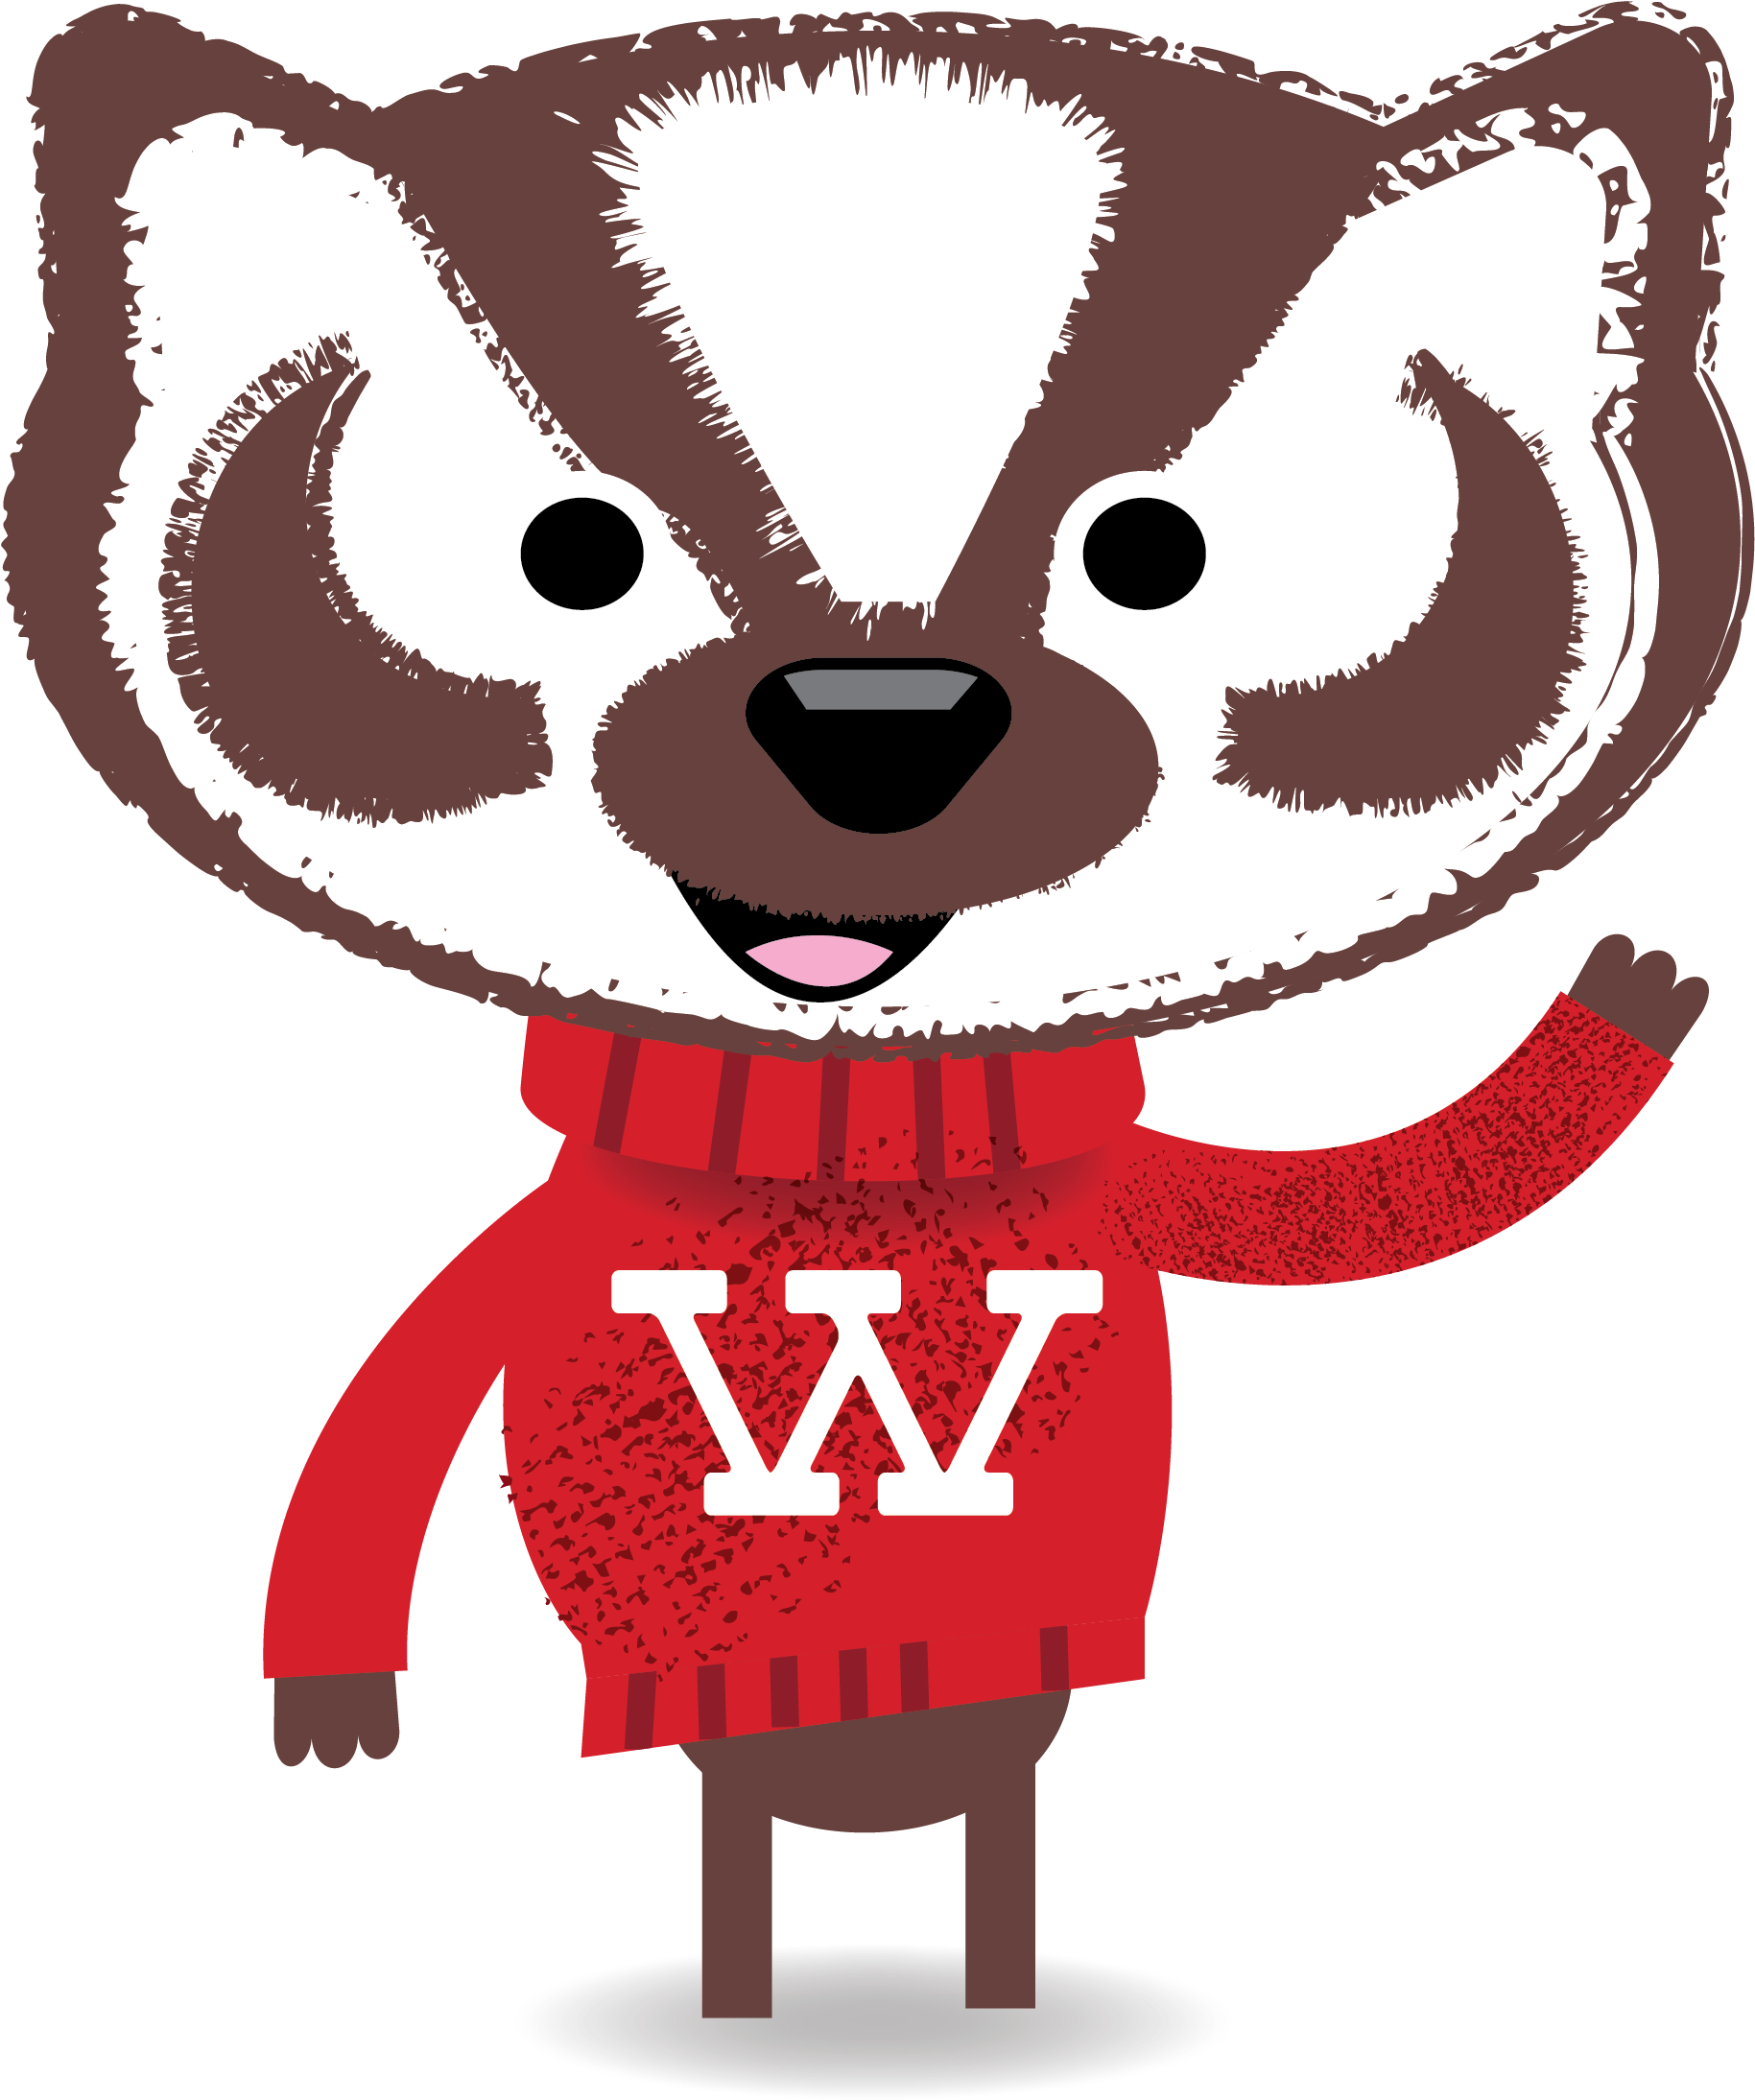 Bucky's Tuition Promise Is Only For Students Earning - University Of Wisconsin- Office Of Student Financial (2500x2500)